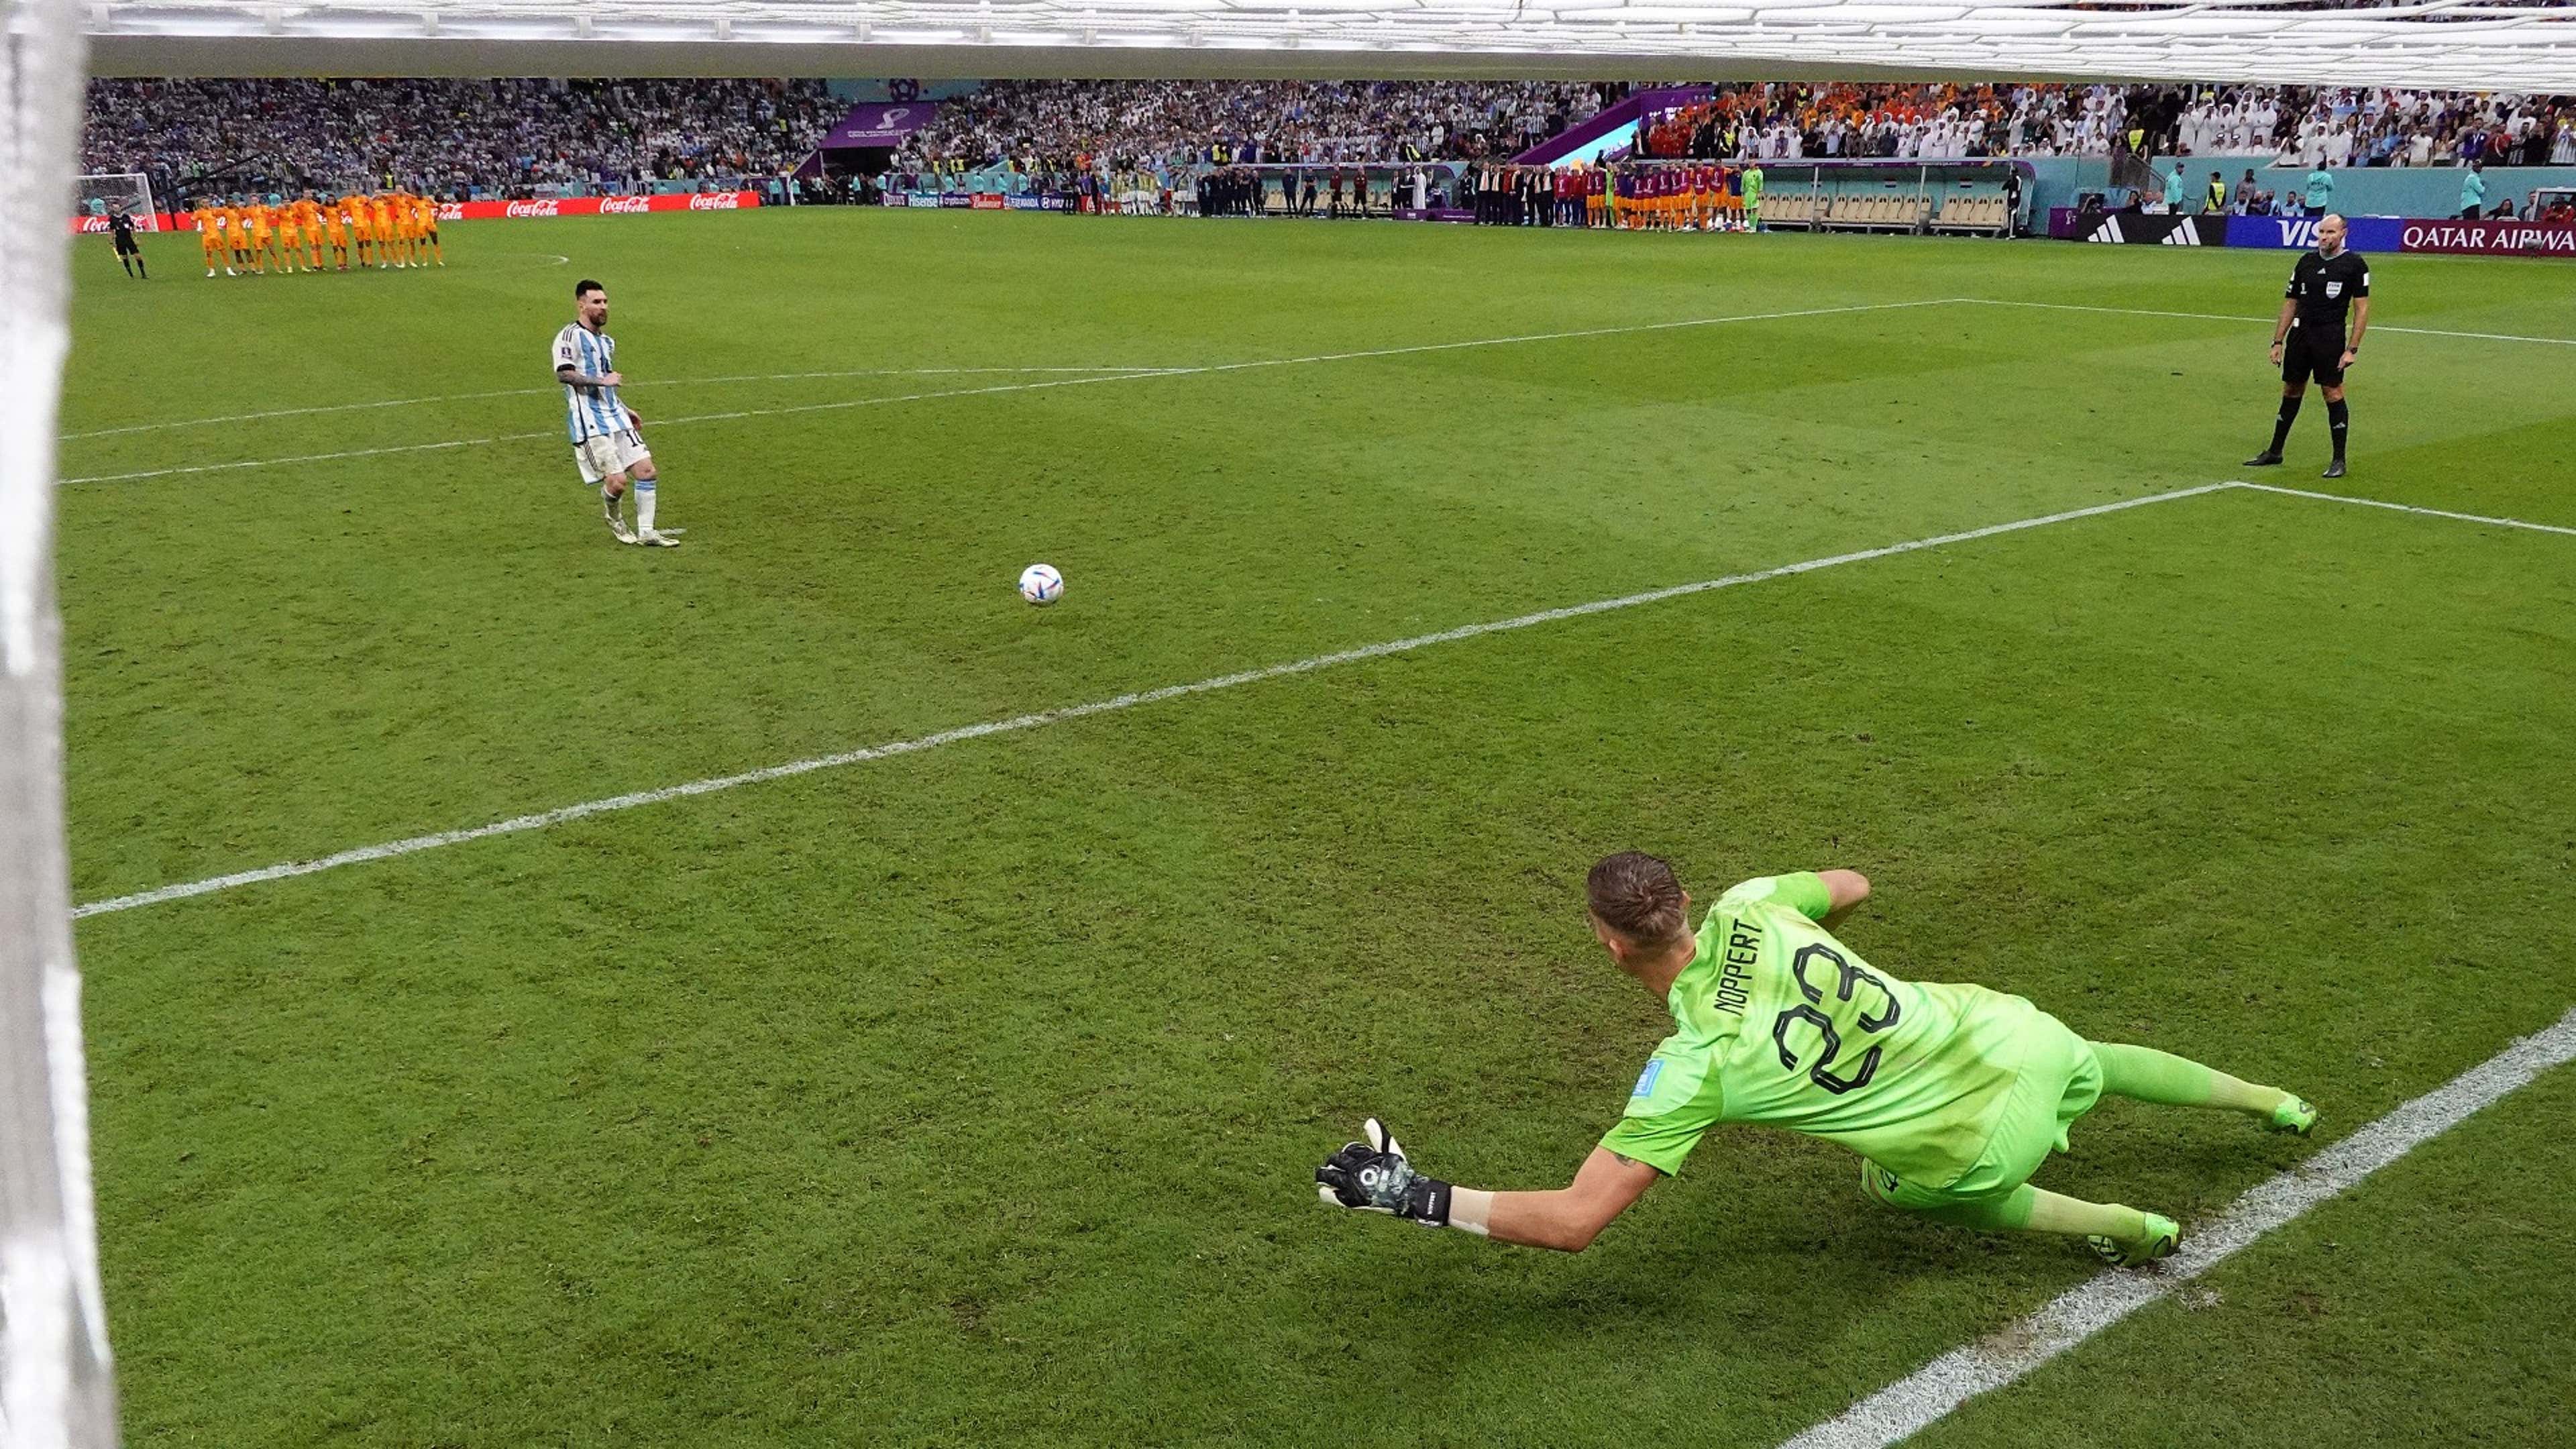 How to fix the penalty shootout: play it before extra time.